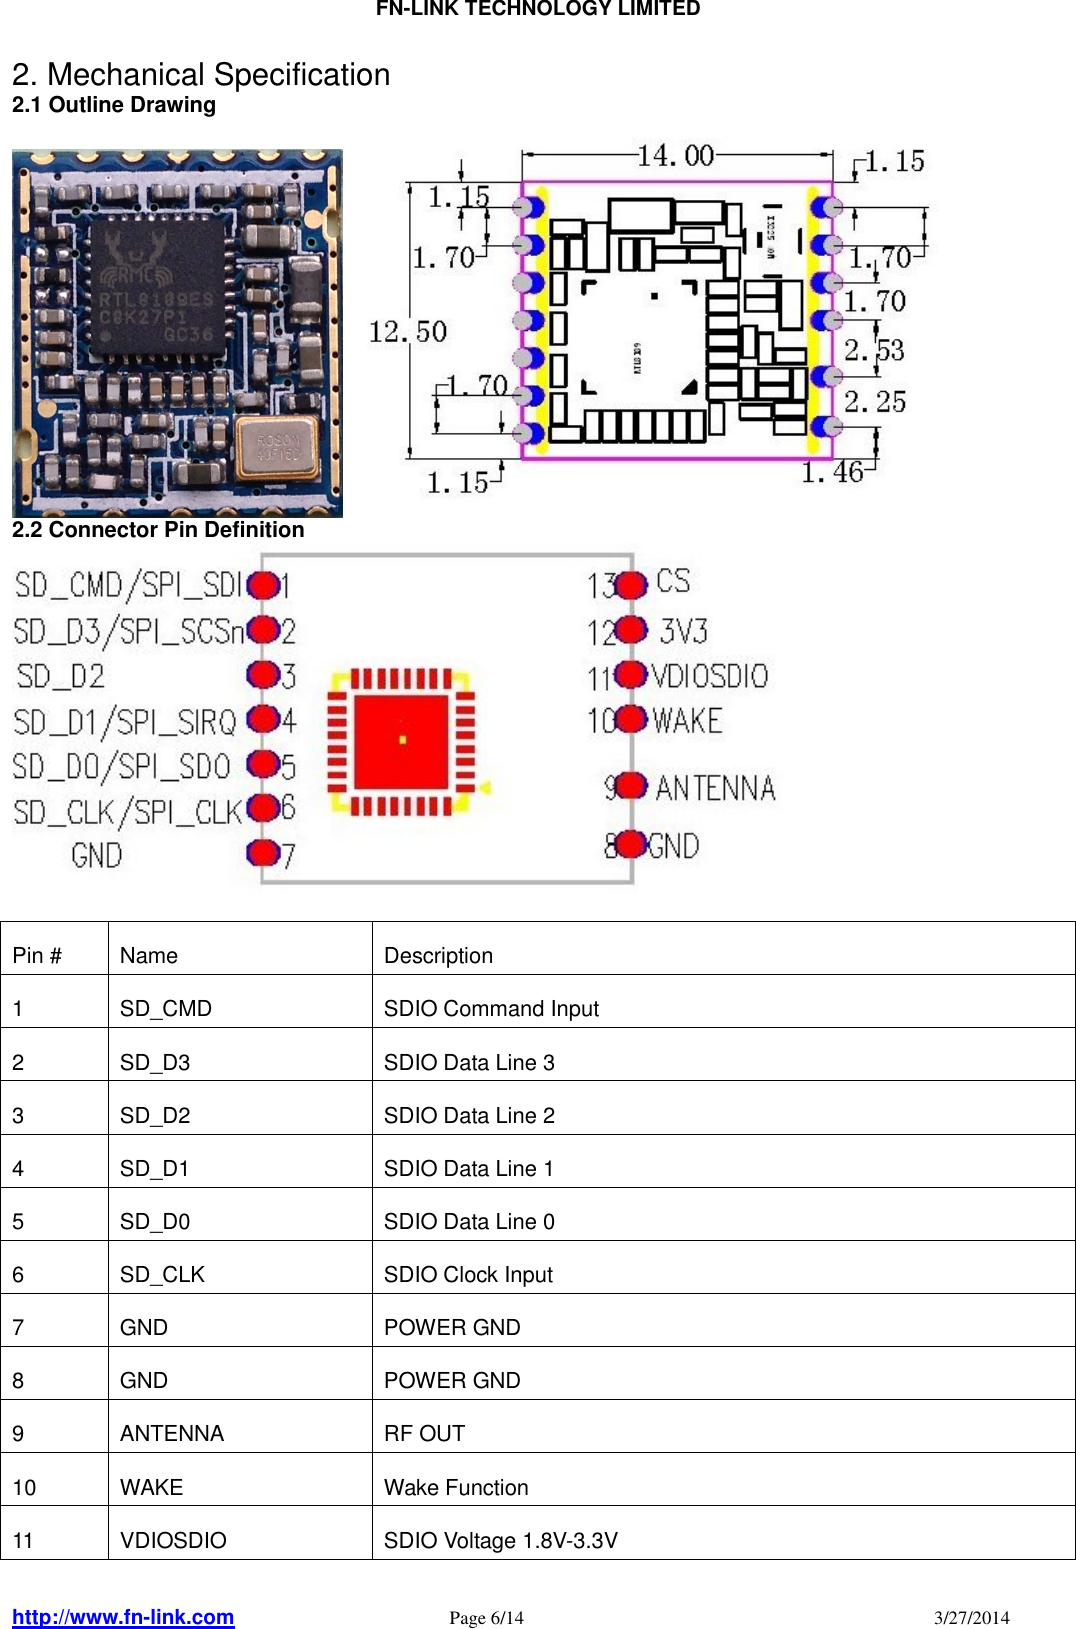                                FN-LINK TECHNOLOGY LIMITED http://www.fn-link.com   Page 6/14                                                                                    3/27/2014      2. Mechanical Specification 2.1 Outline Drawing     2.2 Connector Pin Definition   Pin #  Name  Description 1  SD_CMD  SDIO Command Input 2  SD_D3  SDIO Data Line 3 3  SD_D2  SDIO Data Line 2 4  SD_D1  SDIO Data Line 1 5  SD_D0  SDIO Data Line 0 6  SD_CLK  SDIO Clock Input 7  GND  POWER GND 8  GND  POWER GND 9  ANTENNA  RF OUT 10  WAKE  Wake Function 11  VDIOSDIO  SDIO Voltage 1.8V-3.3V 